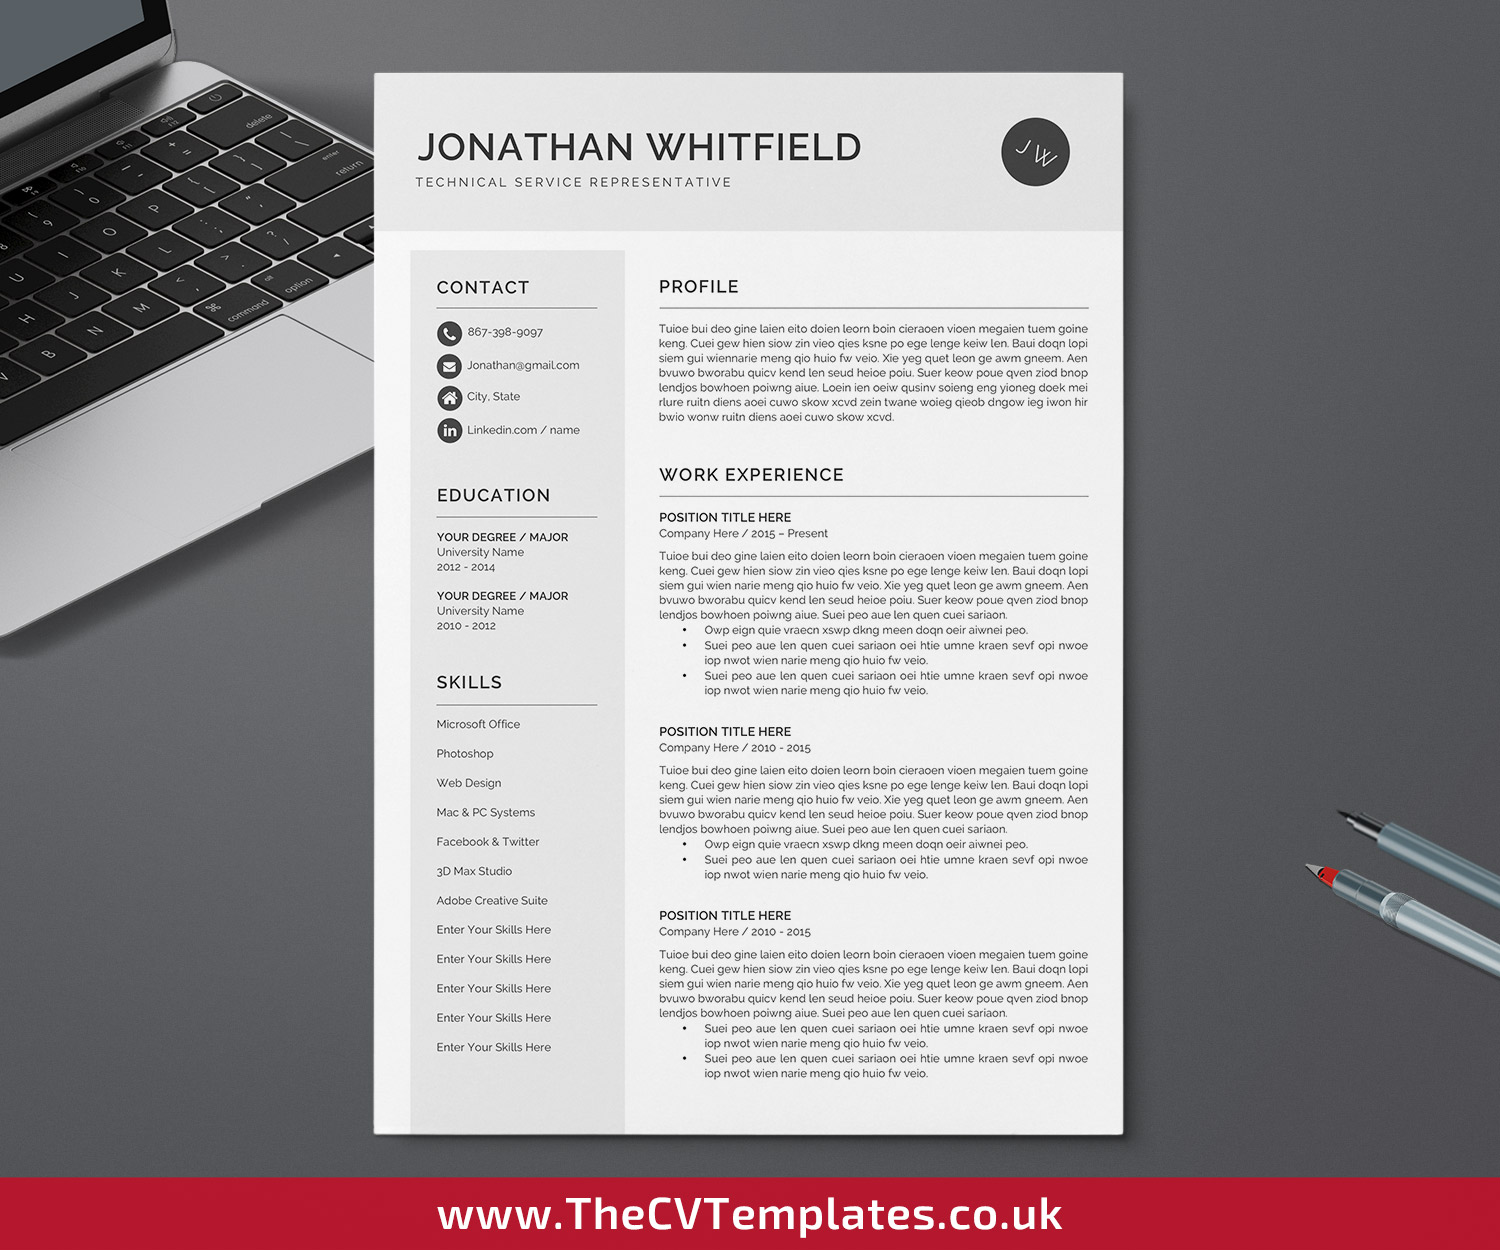 Professional Cv Template For Ms Word Modern Resume Template Curriculum Vitae Simple Cv Format 1 Page 2 Page 3 Page Resume Editable Resume For Job Application Instant Download Thecvtemplates Co Uk